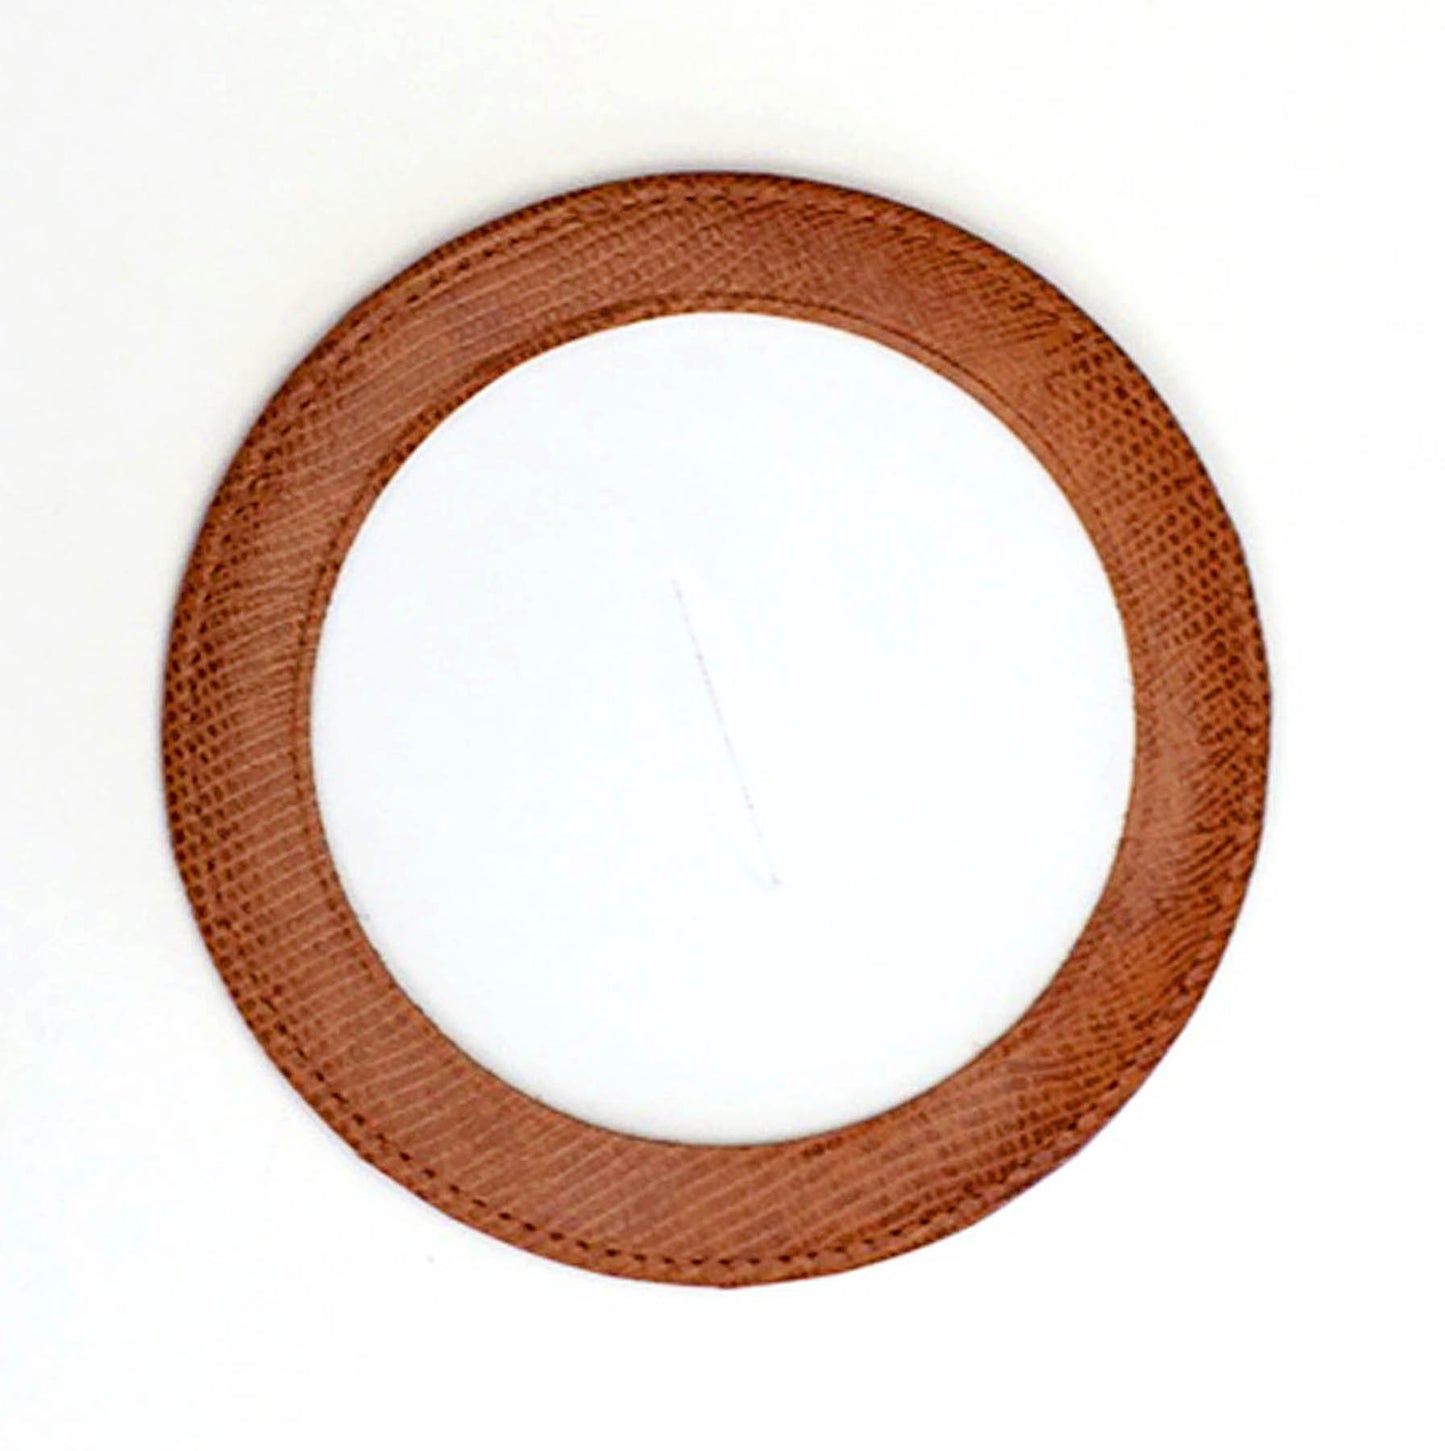 Accessory ~ Tan-Brown Leather Magnetic Coaster or Ornament Holder for Needlepoint Canvas by LEE